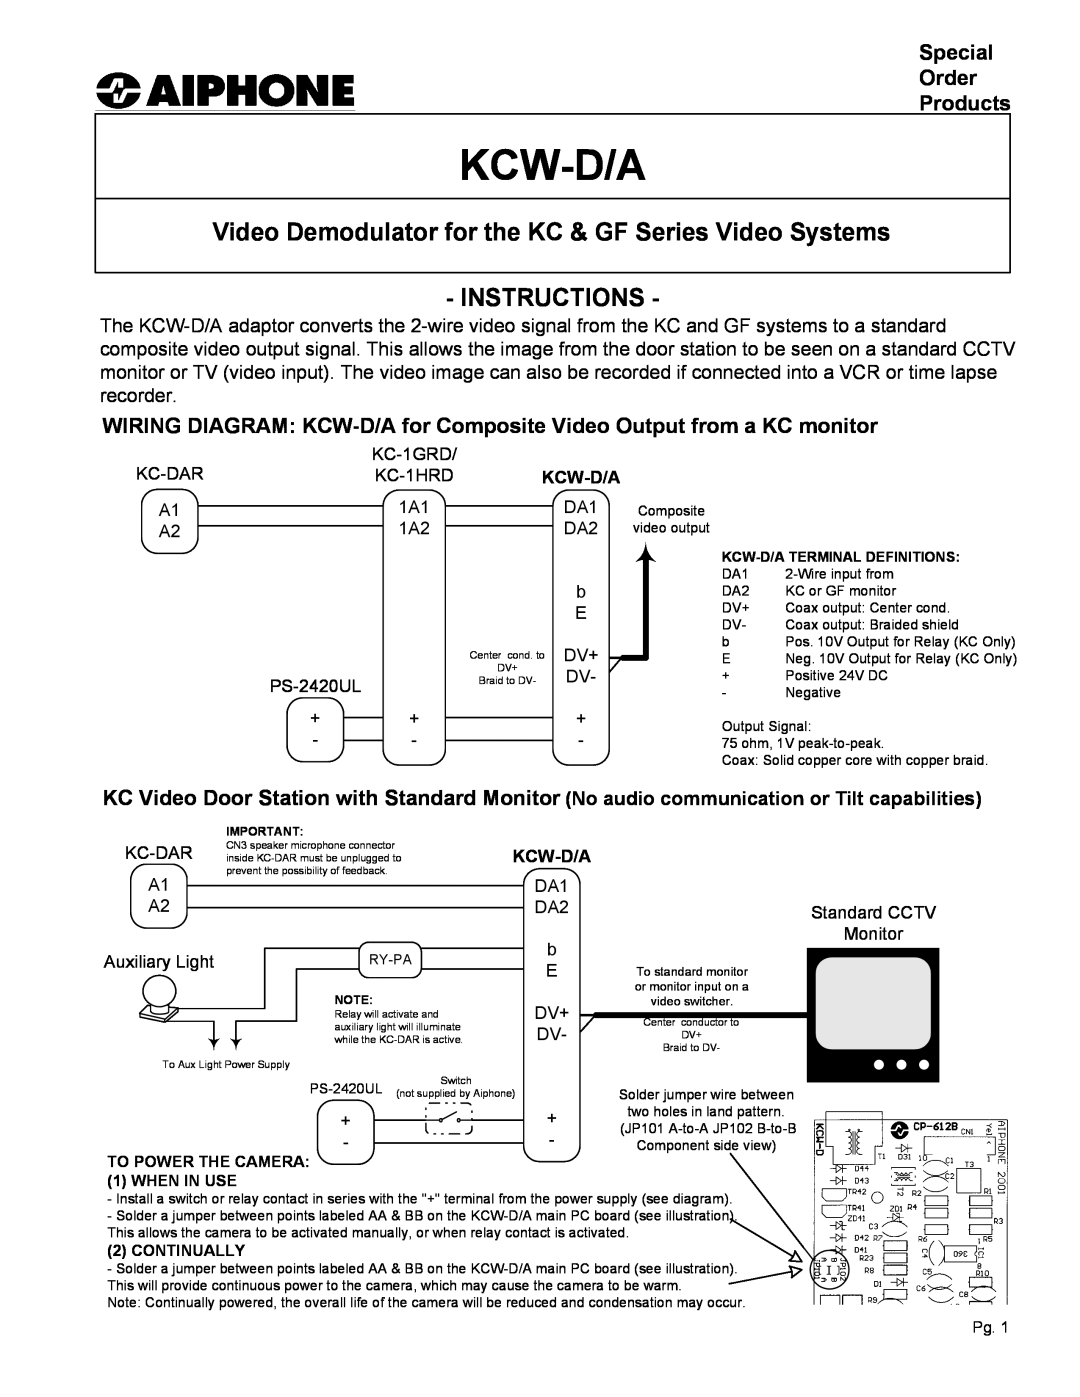 Aiphone A, LE-SS/LE-SSR manual Instructions, Installation, Wiring Diagrams 